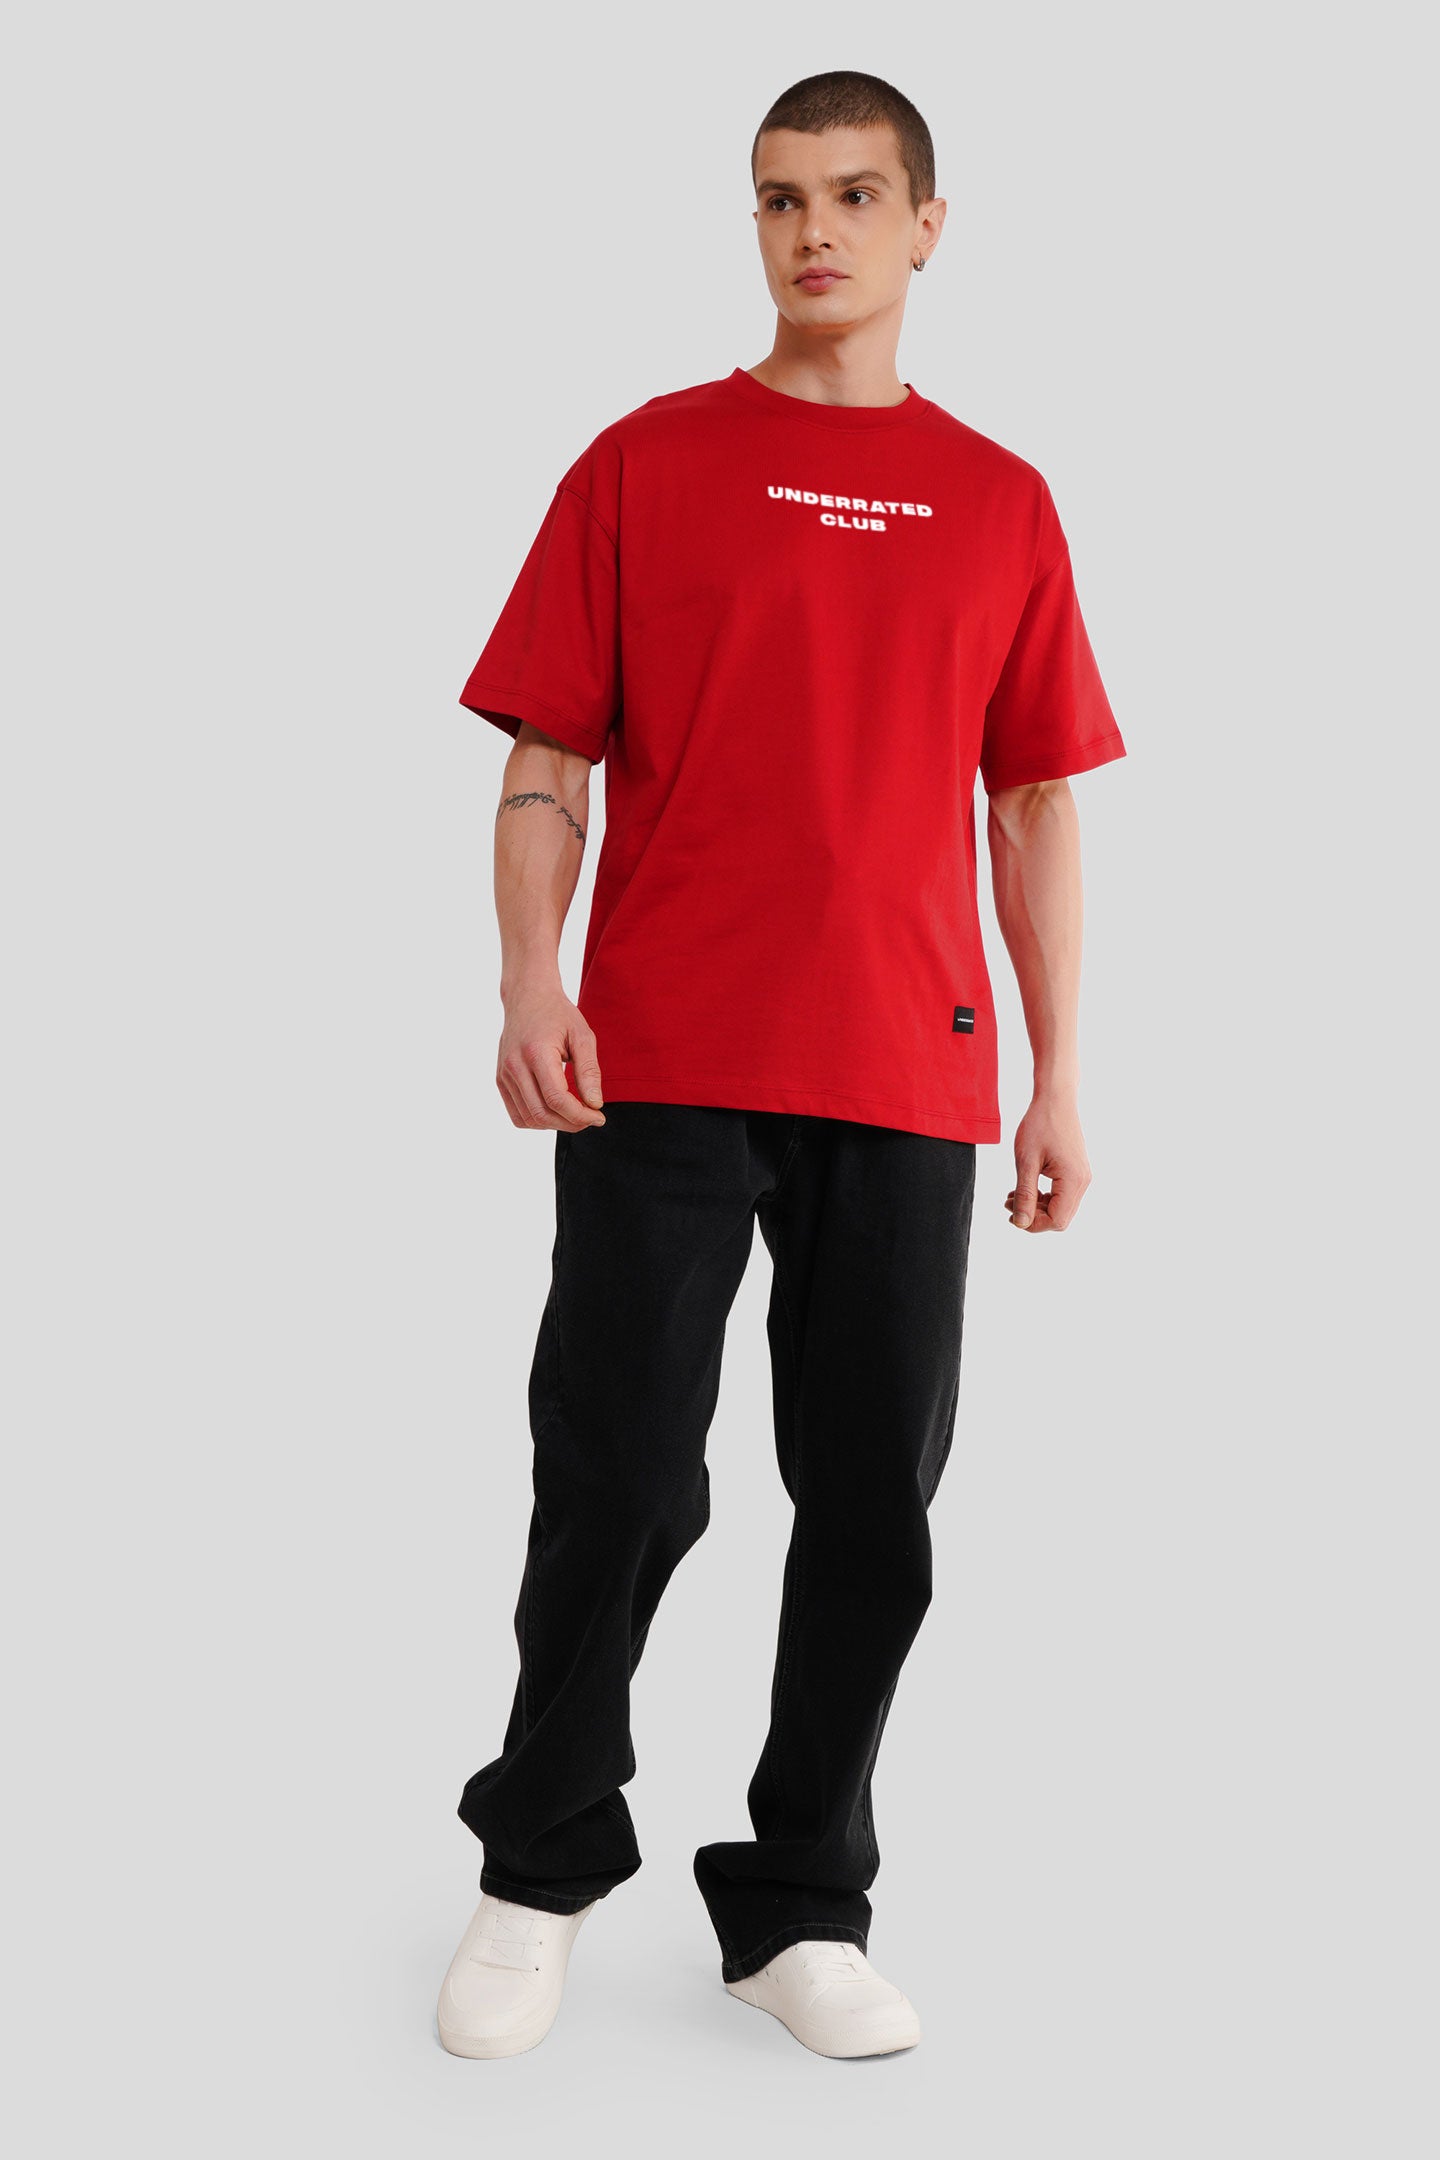 Turning Dreams Into Reality Red Printed T Shirt Men Oversized Fit With Front And Back Design Pic 5